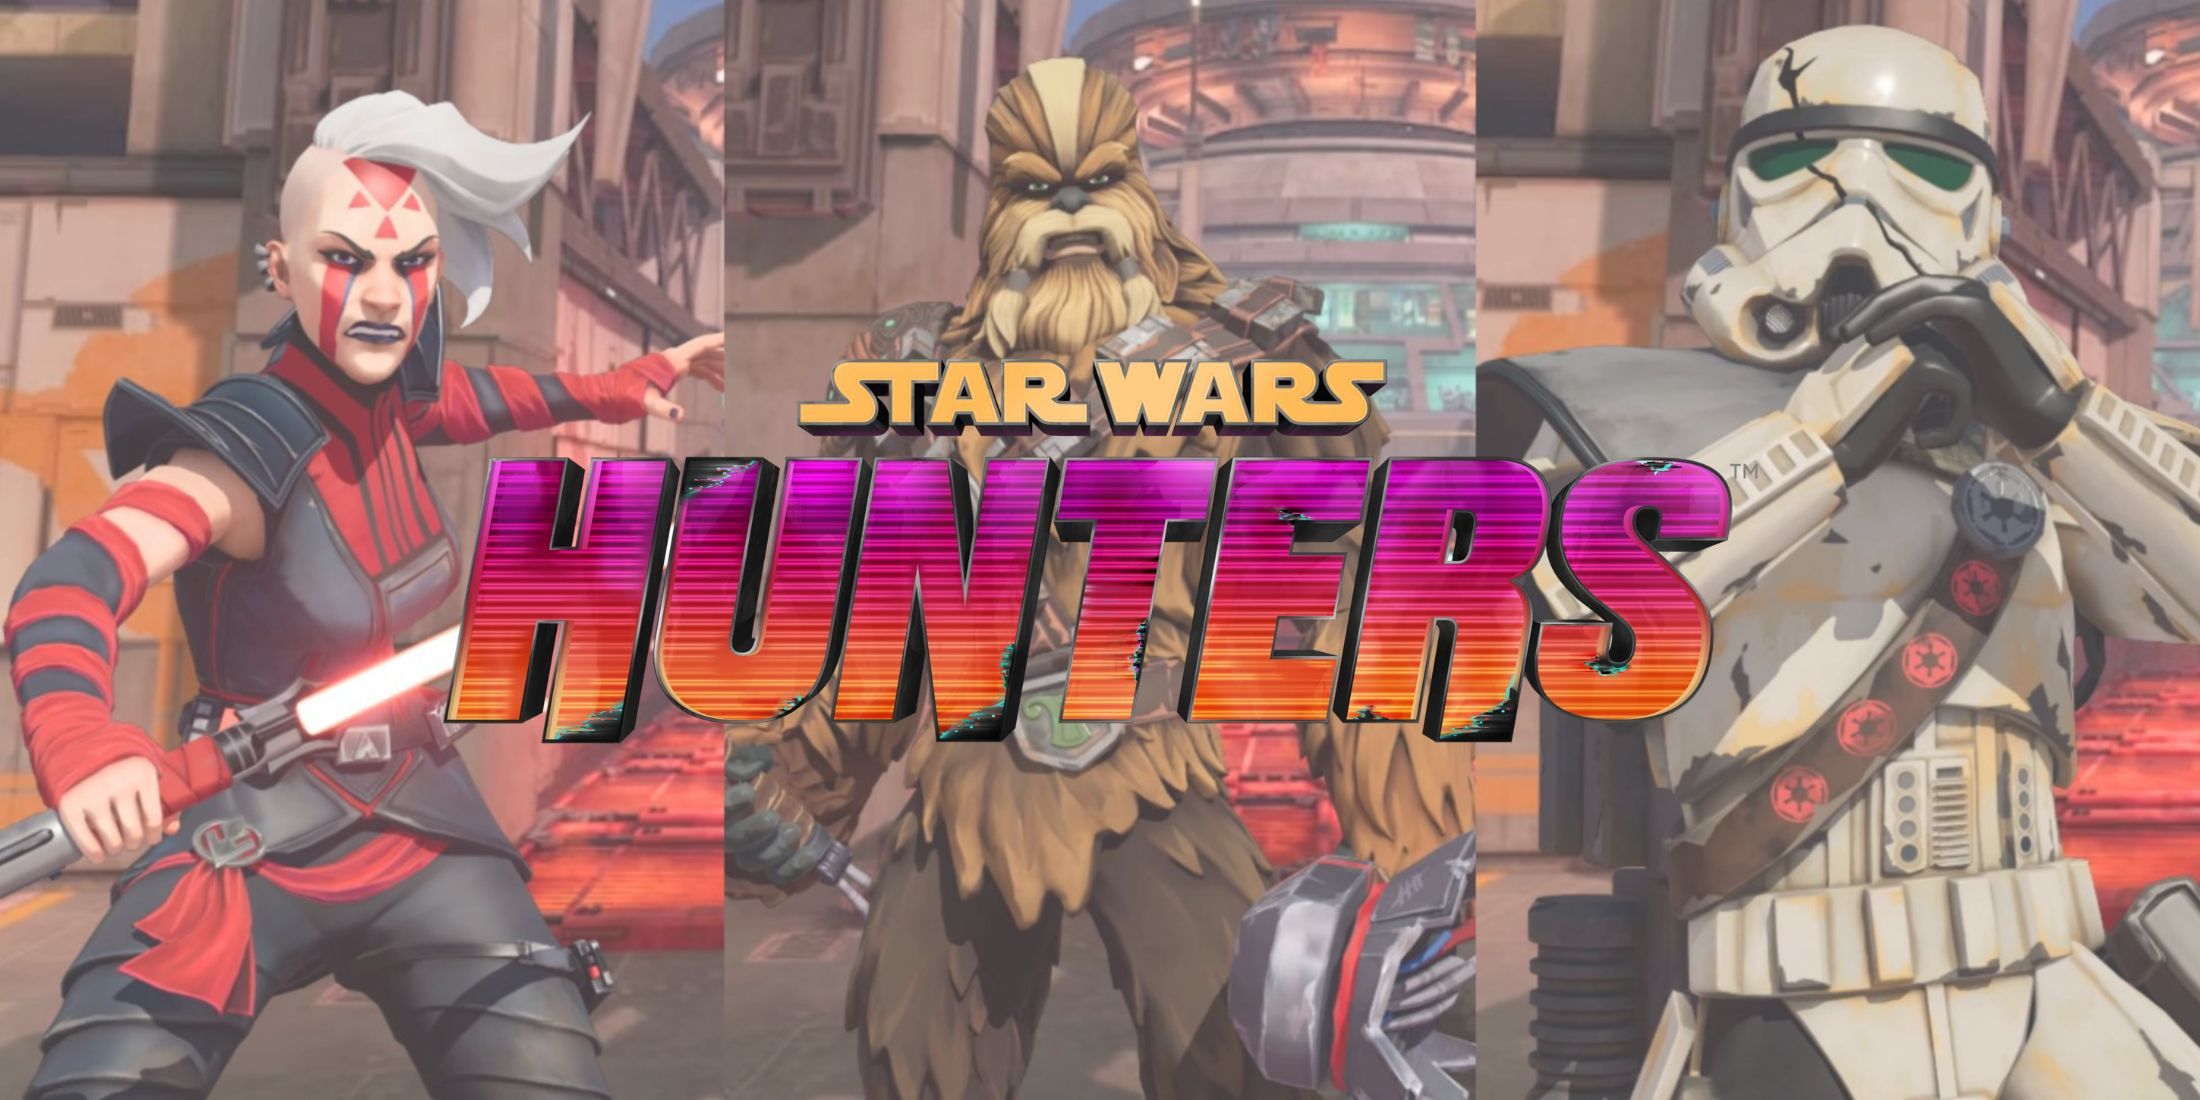 Rieve, Grozz, and Sentinel from Star Wars: Hunters behind the game's logo